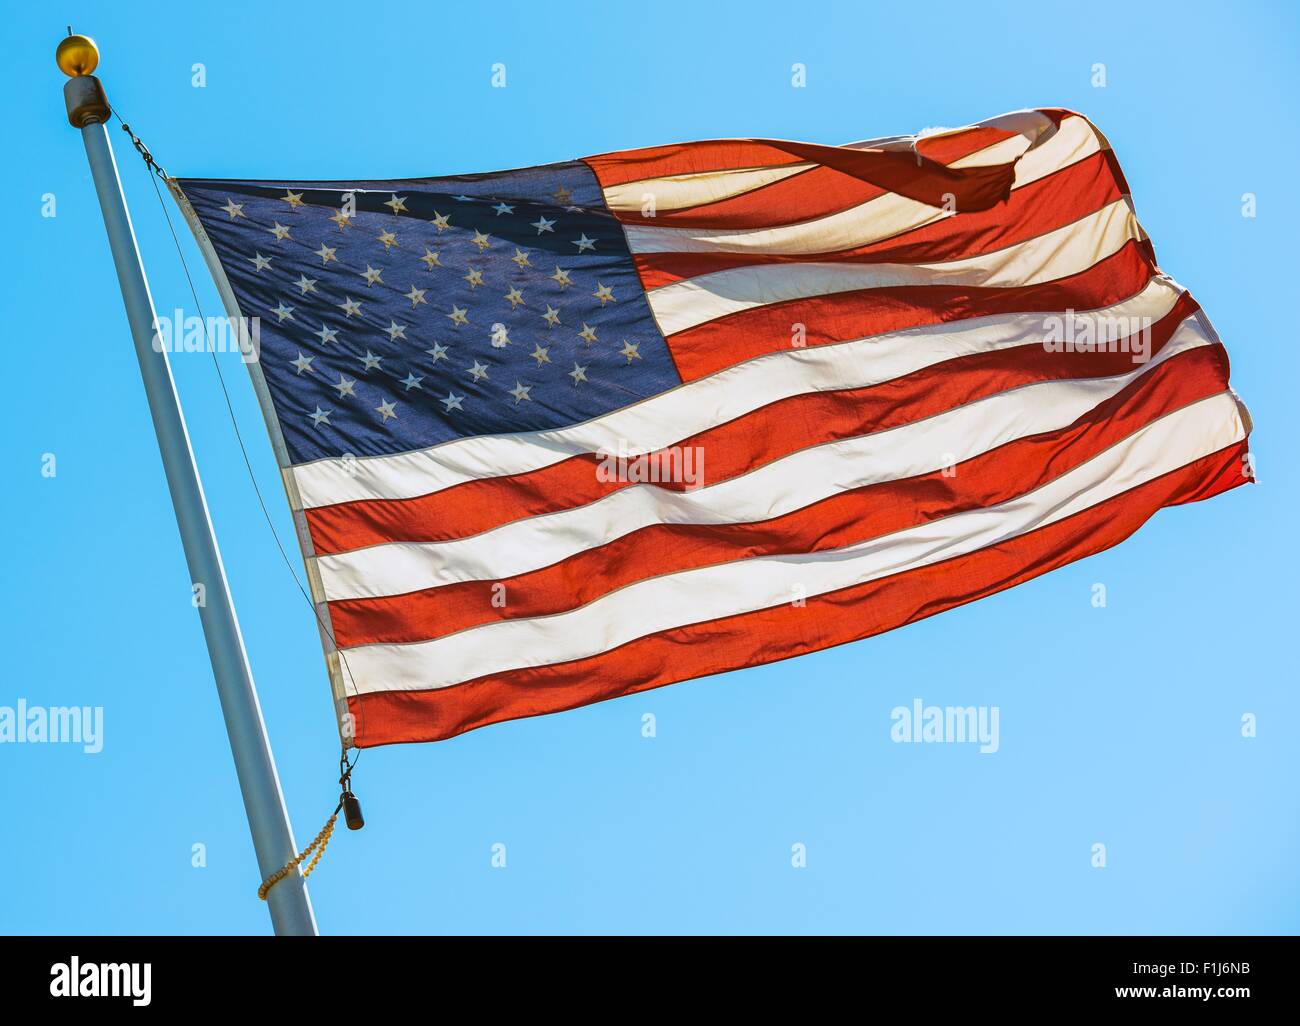 American Flag on a Pole. Waving United States Flag on the Blue Sky. Stock Photo